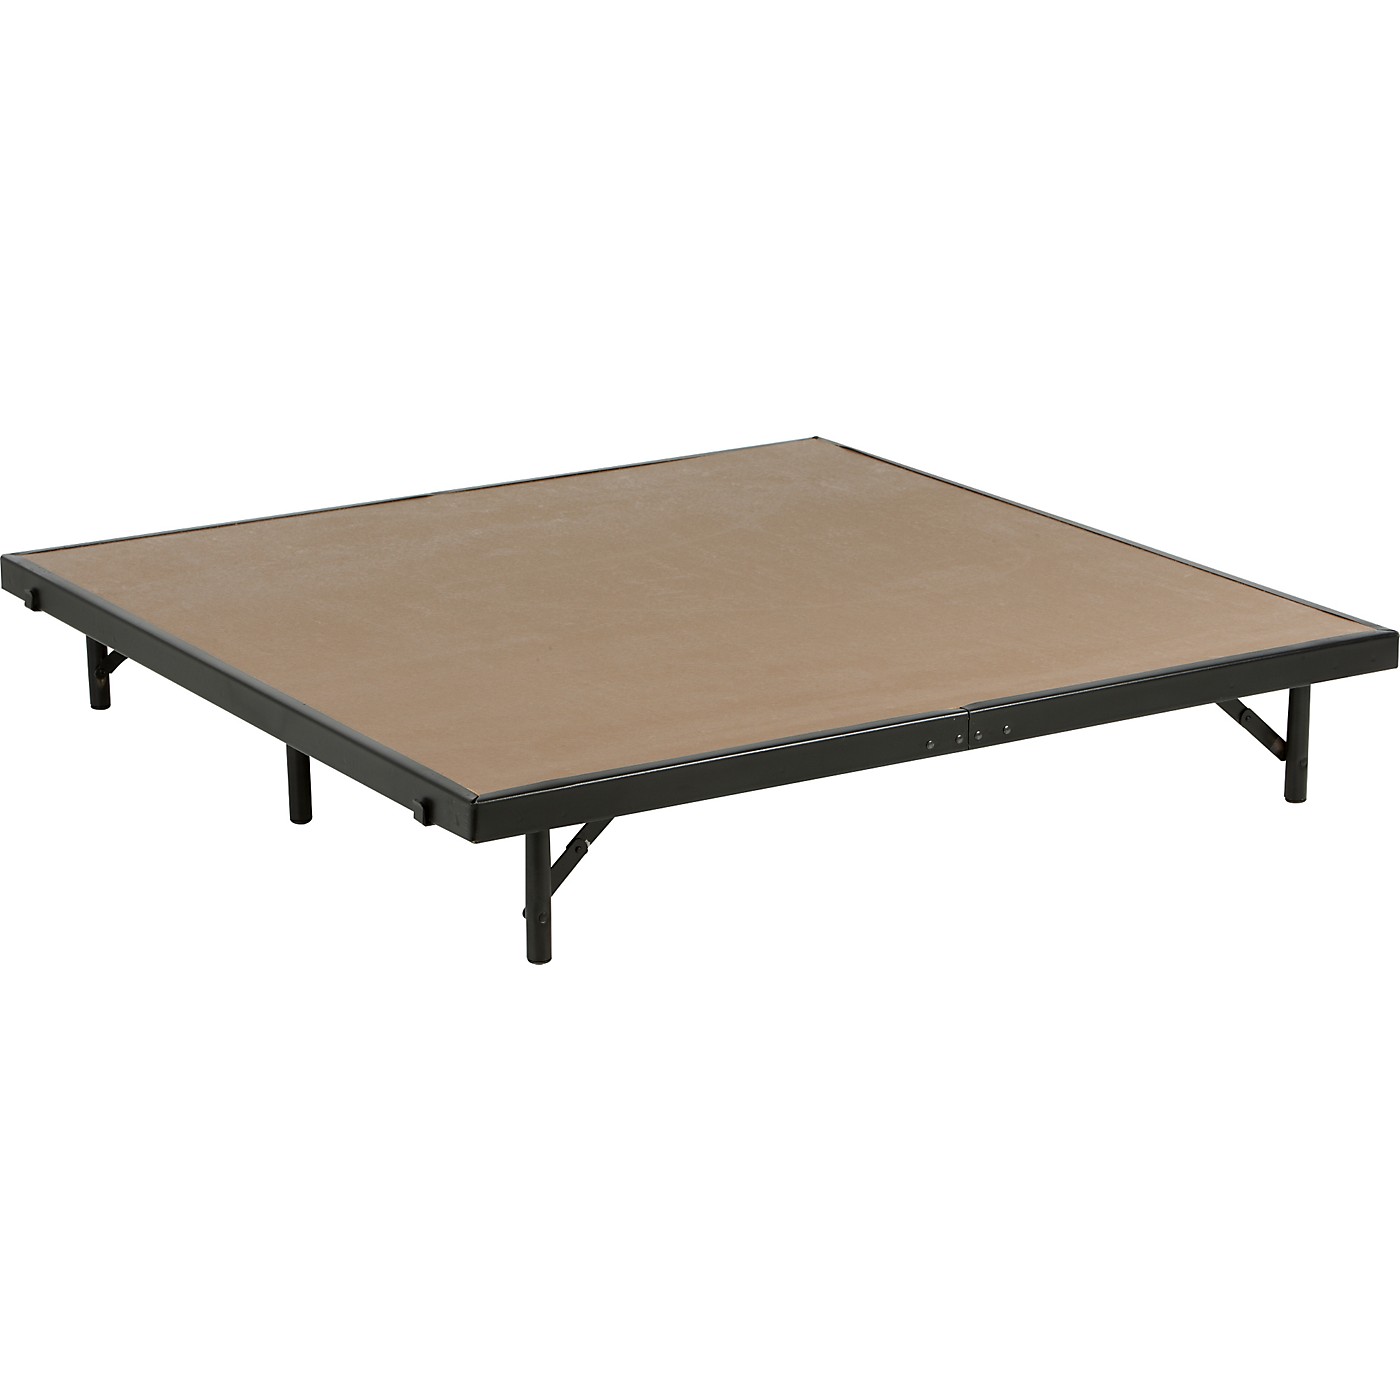 Midwest Folding Products 4' Deep X 4' Wide Single Height Portable Stage & Seated Riser thumbnail